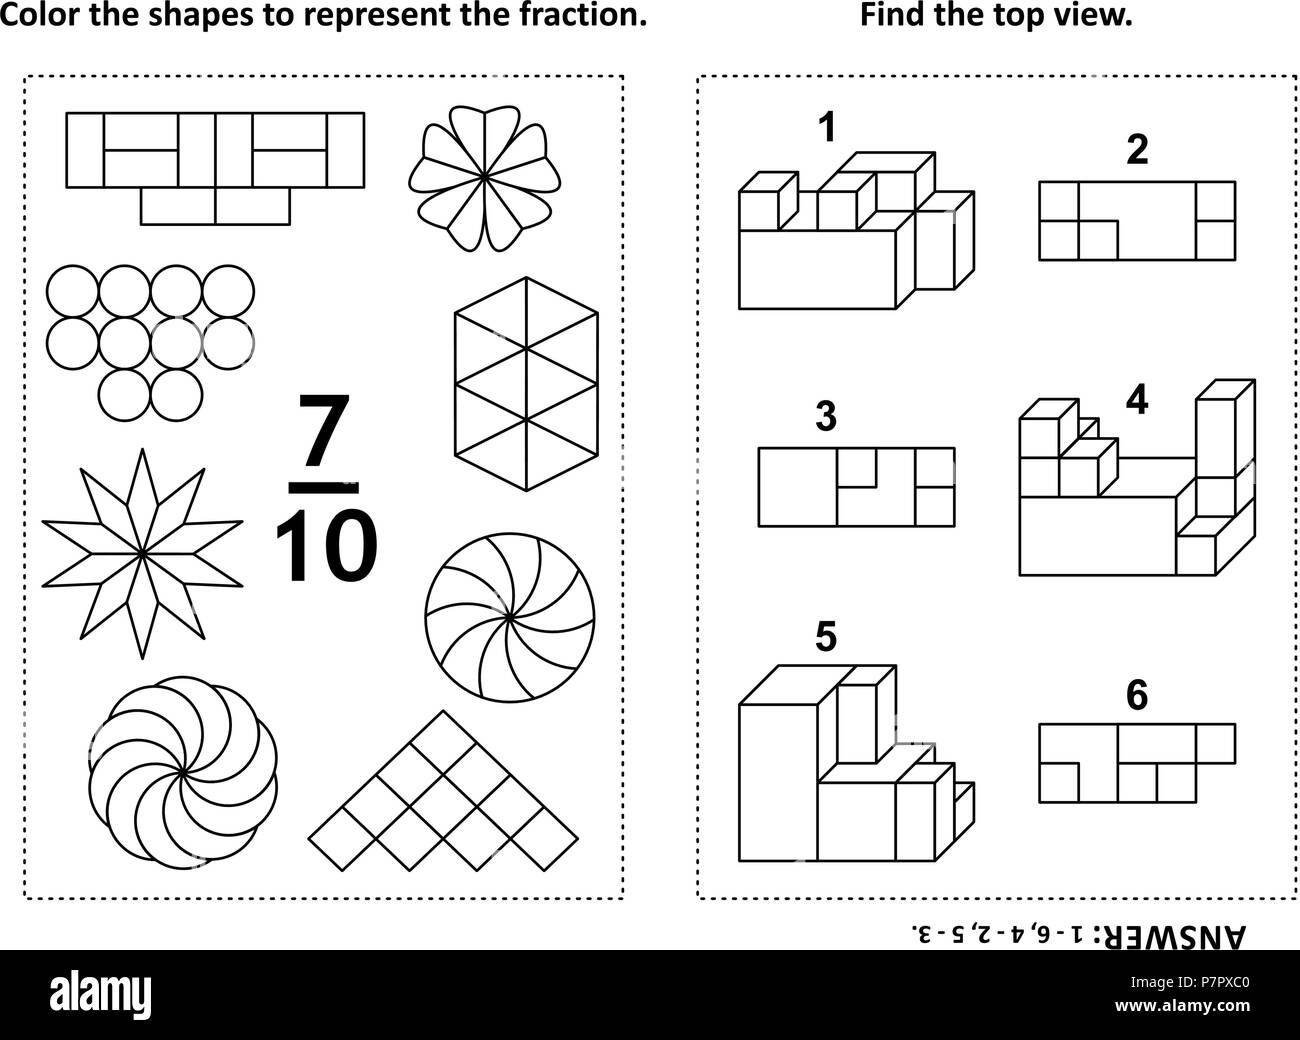 Two visual math puzzles and coloring pages. Color the shapes to represent the fraction. Find the top view. Black and white. Answer included. Stock Vector